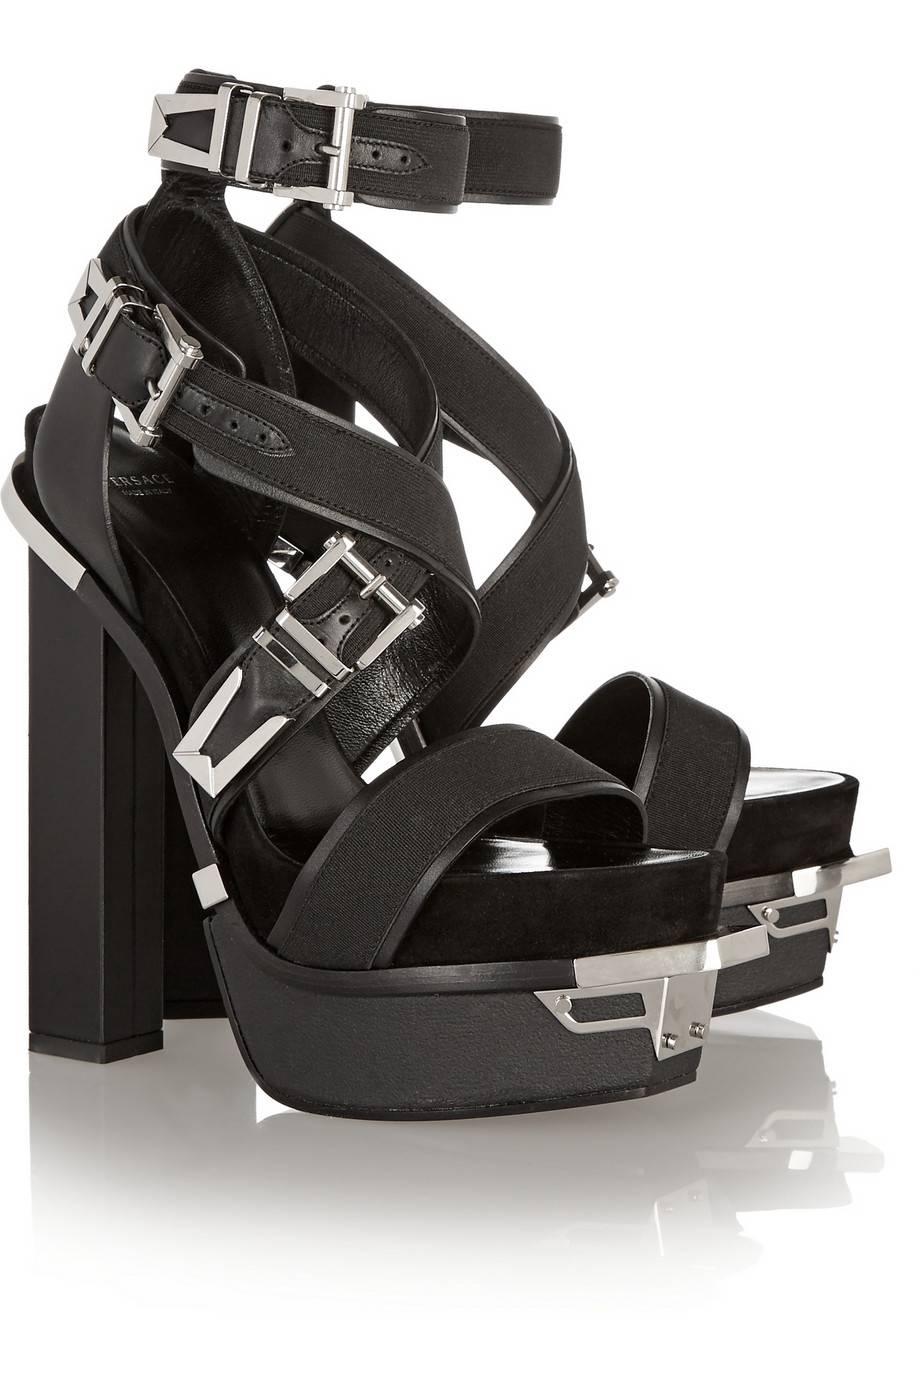 VERSACE 

Versace black sandals

Made in Italy

Heel measures approximately 6 inches 

 2.5